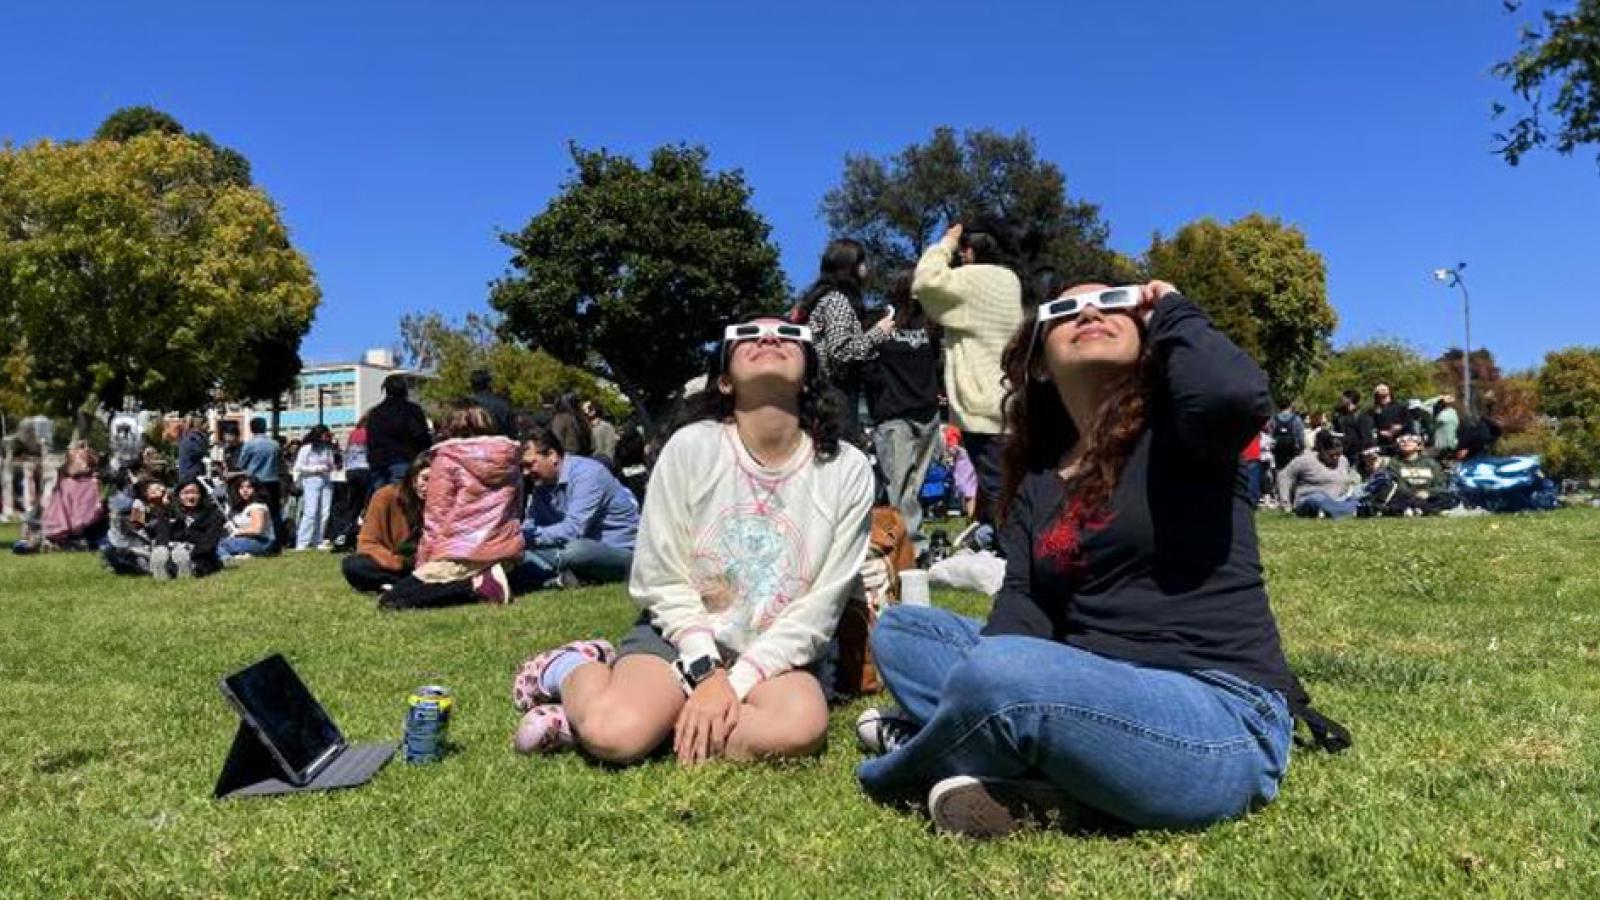 people sitting on grass watching eclipse with viewing glasses